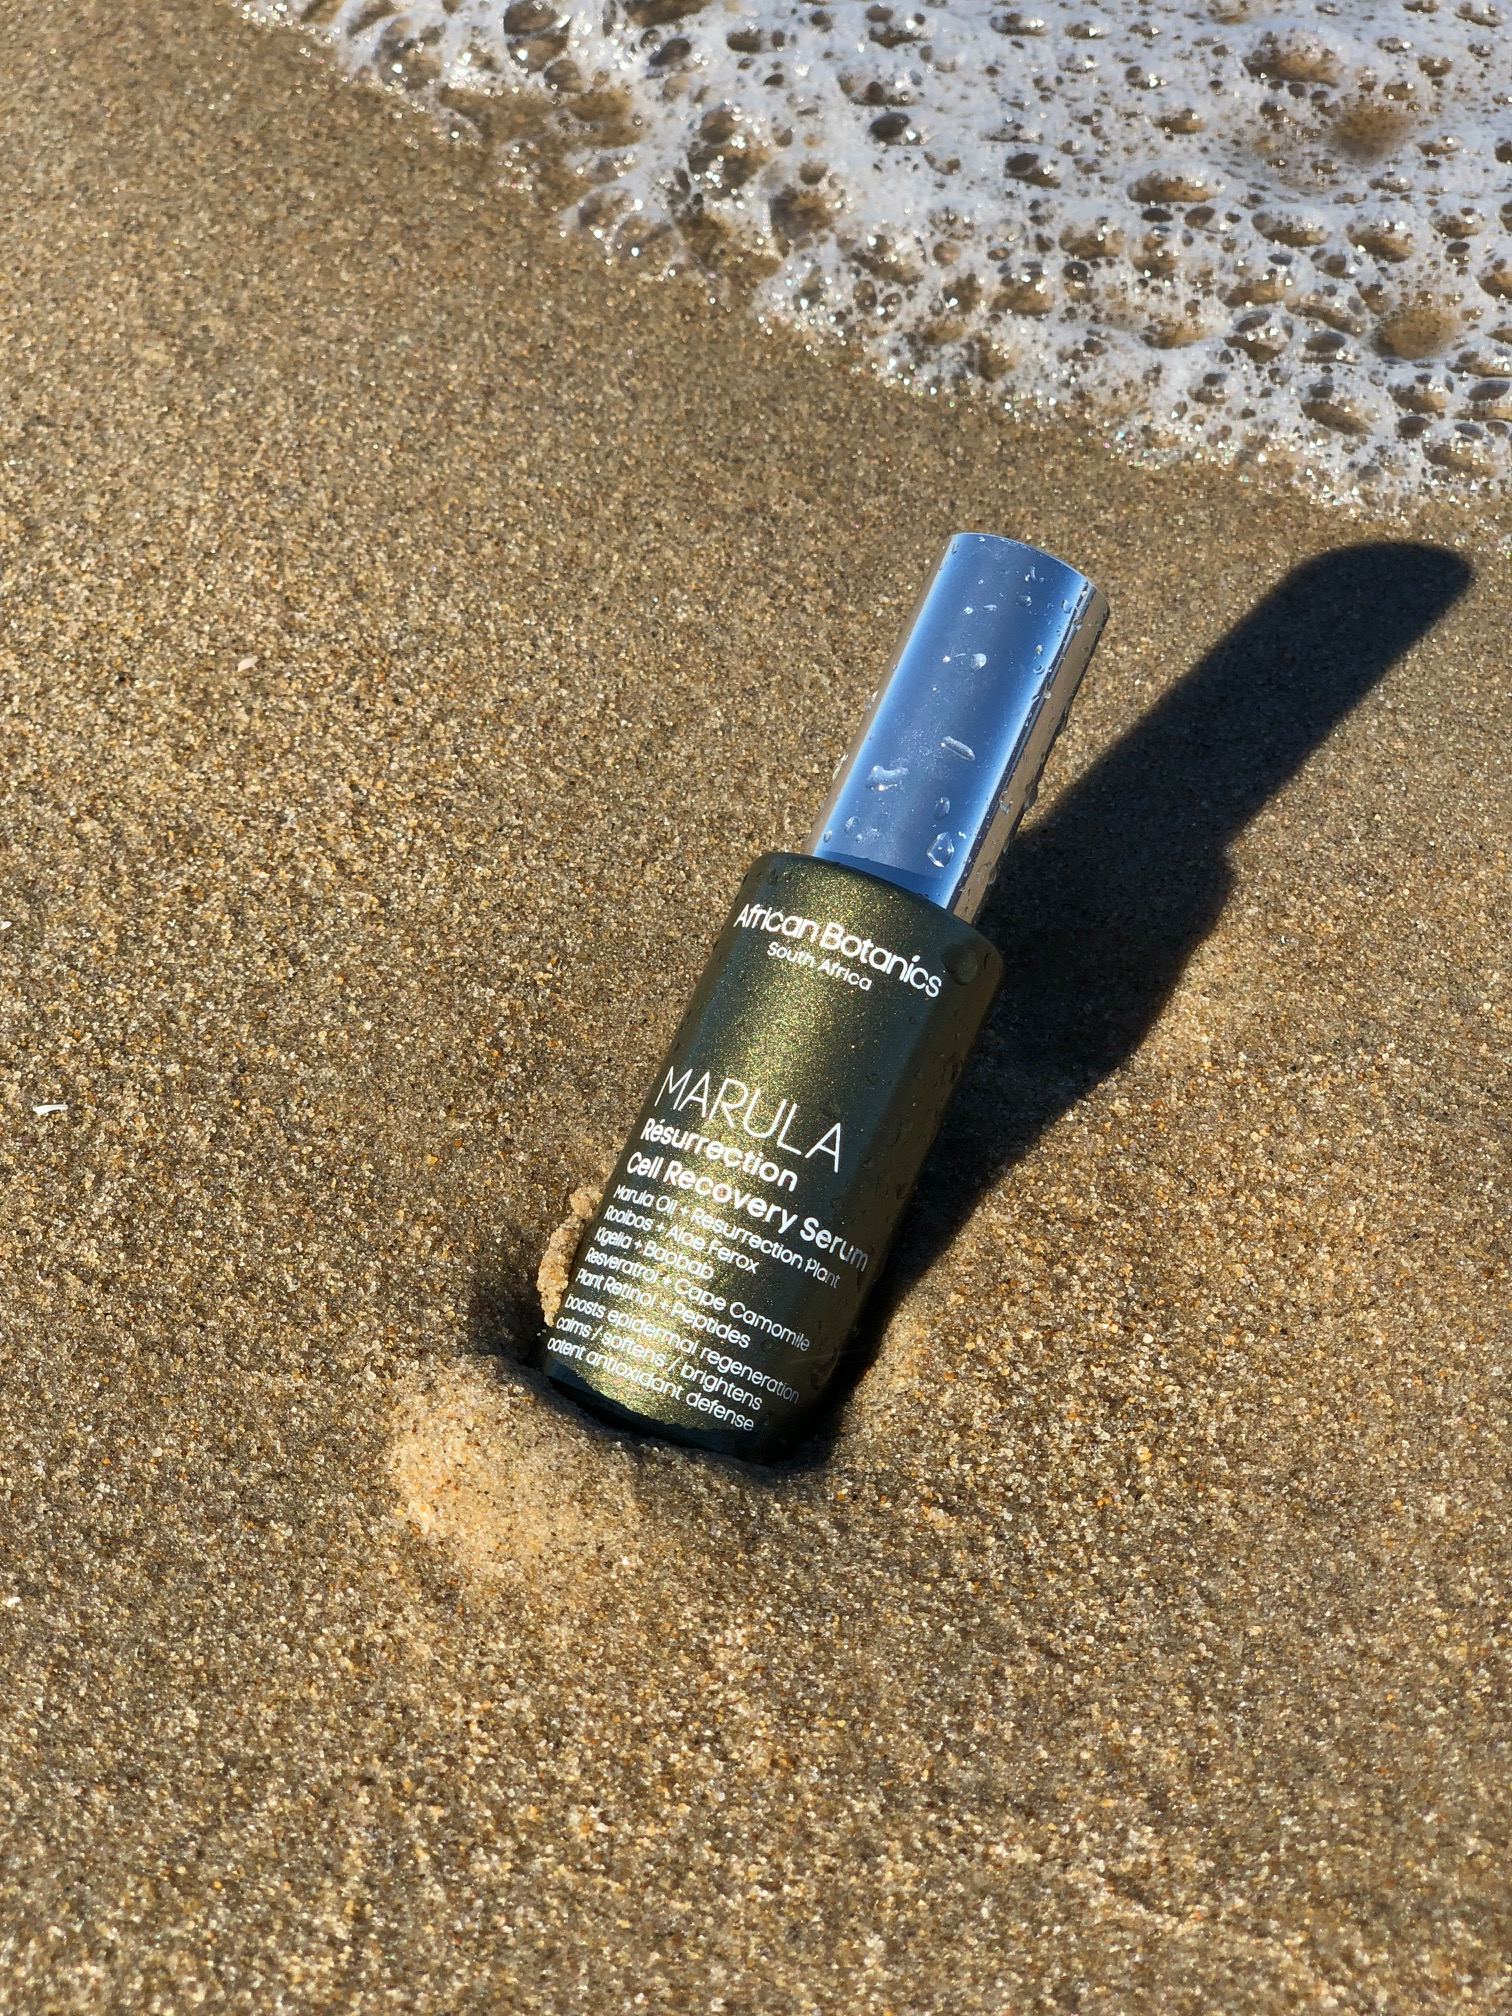 Product Review: African Botanics Resurrection Cell Recovery Serum